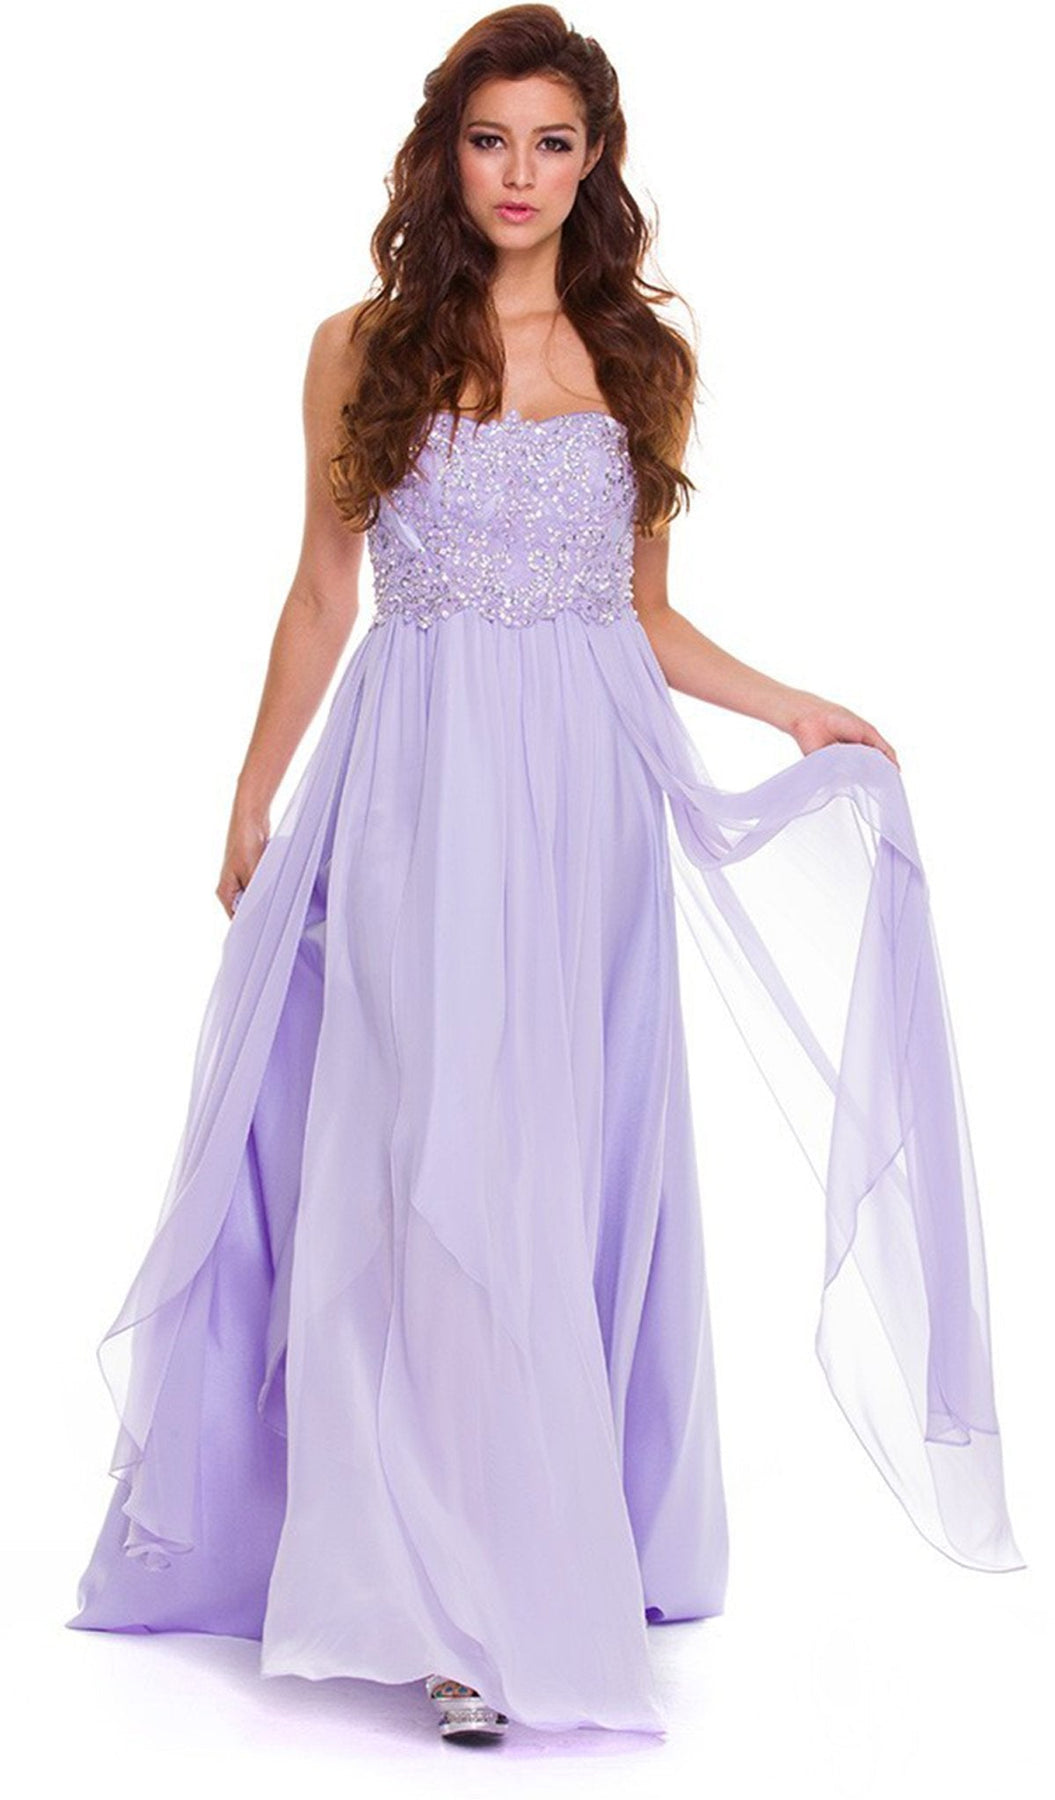 Nox Anabel - 2554 Embellished Semi-Sweetheart A-line Dress Special Occasion Dress XS / Lilac